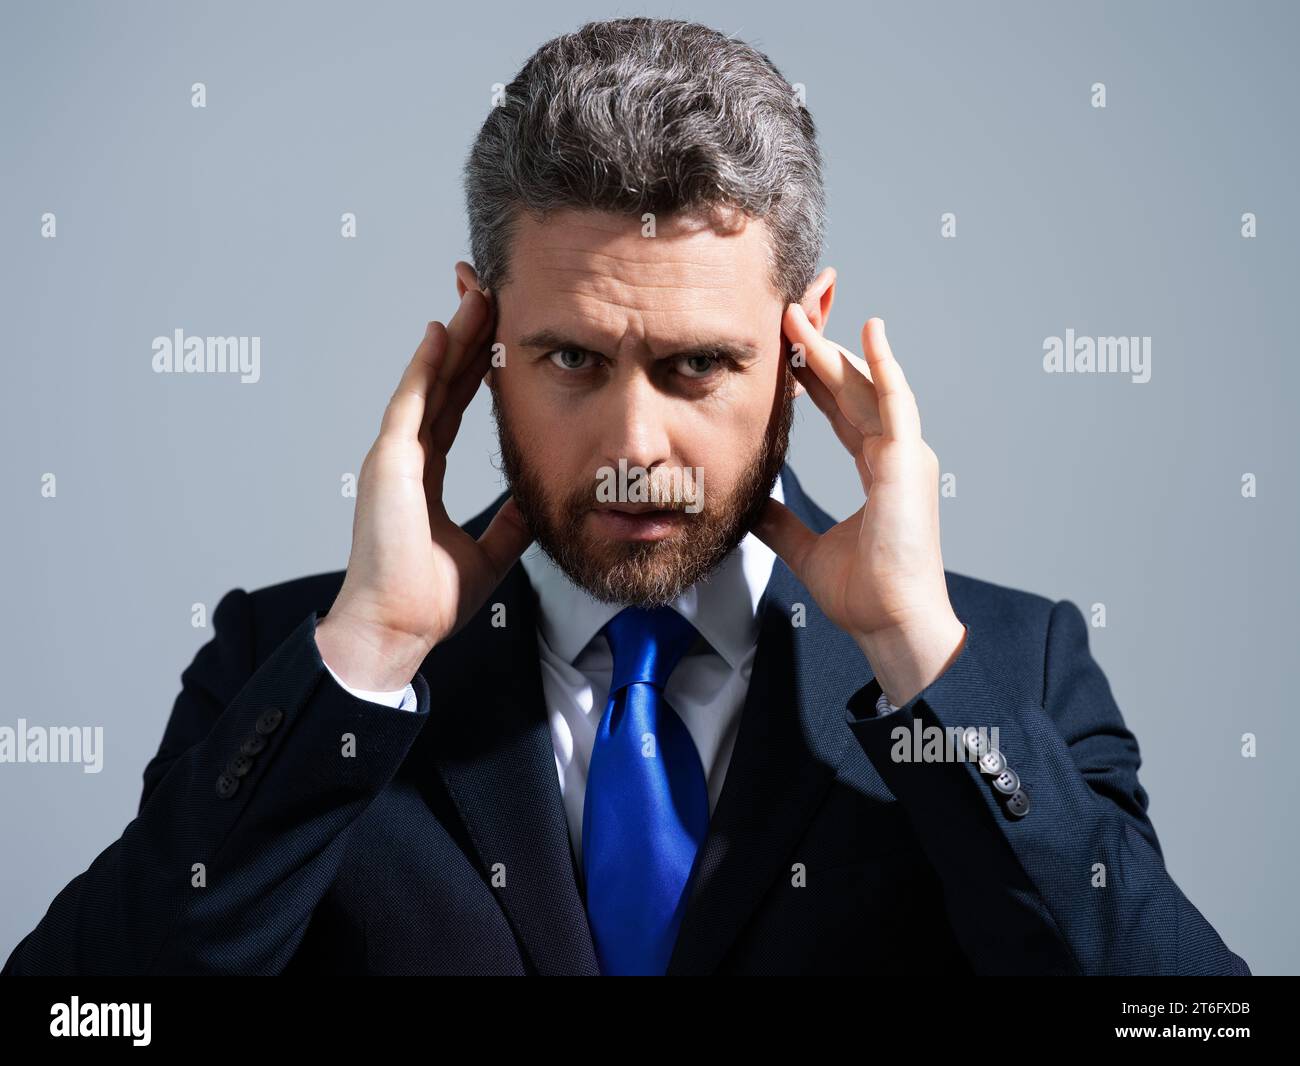 Tired, headache and eye strain. Businessman with stress, burnout and fatigue eyestrain. Business man rubbing tired eyes in studio. Vision problem, bad Stock Photo